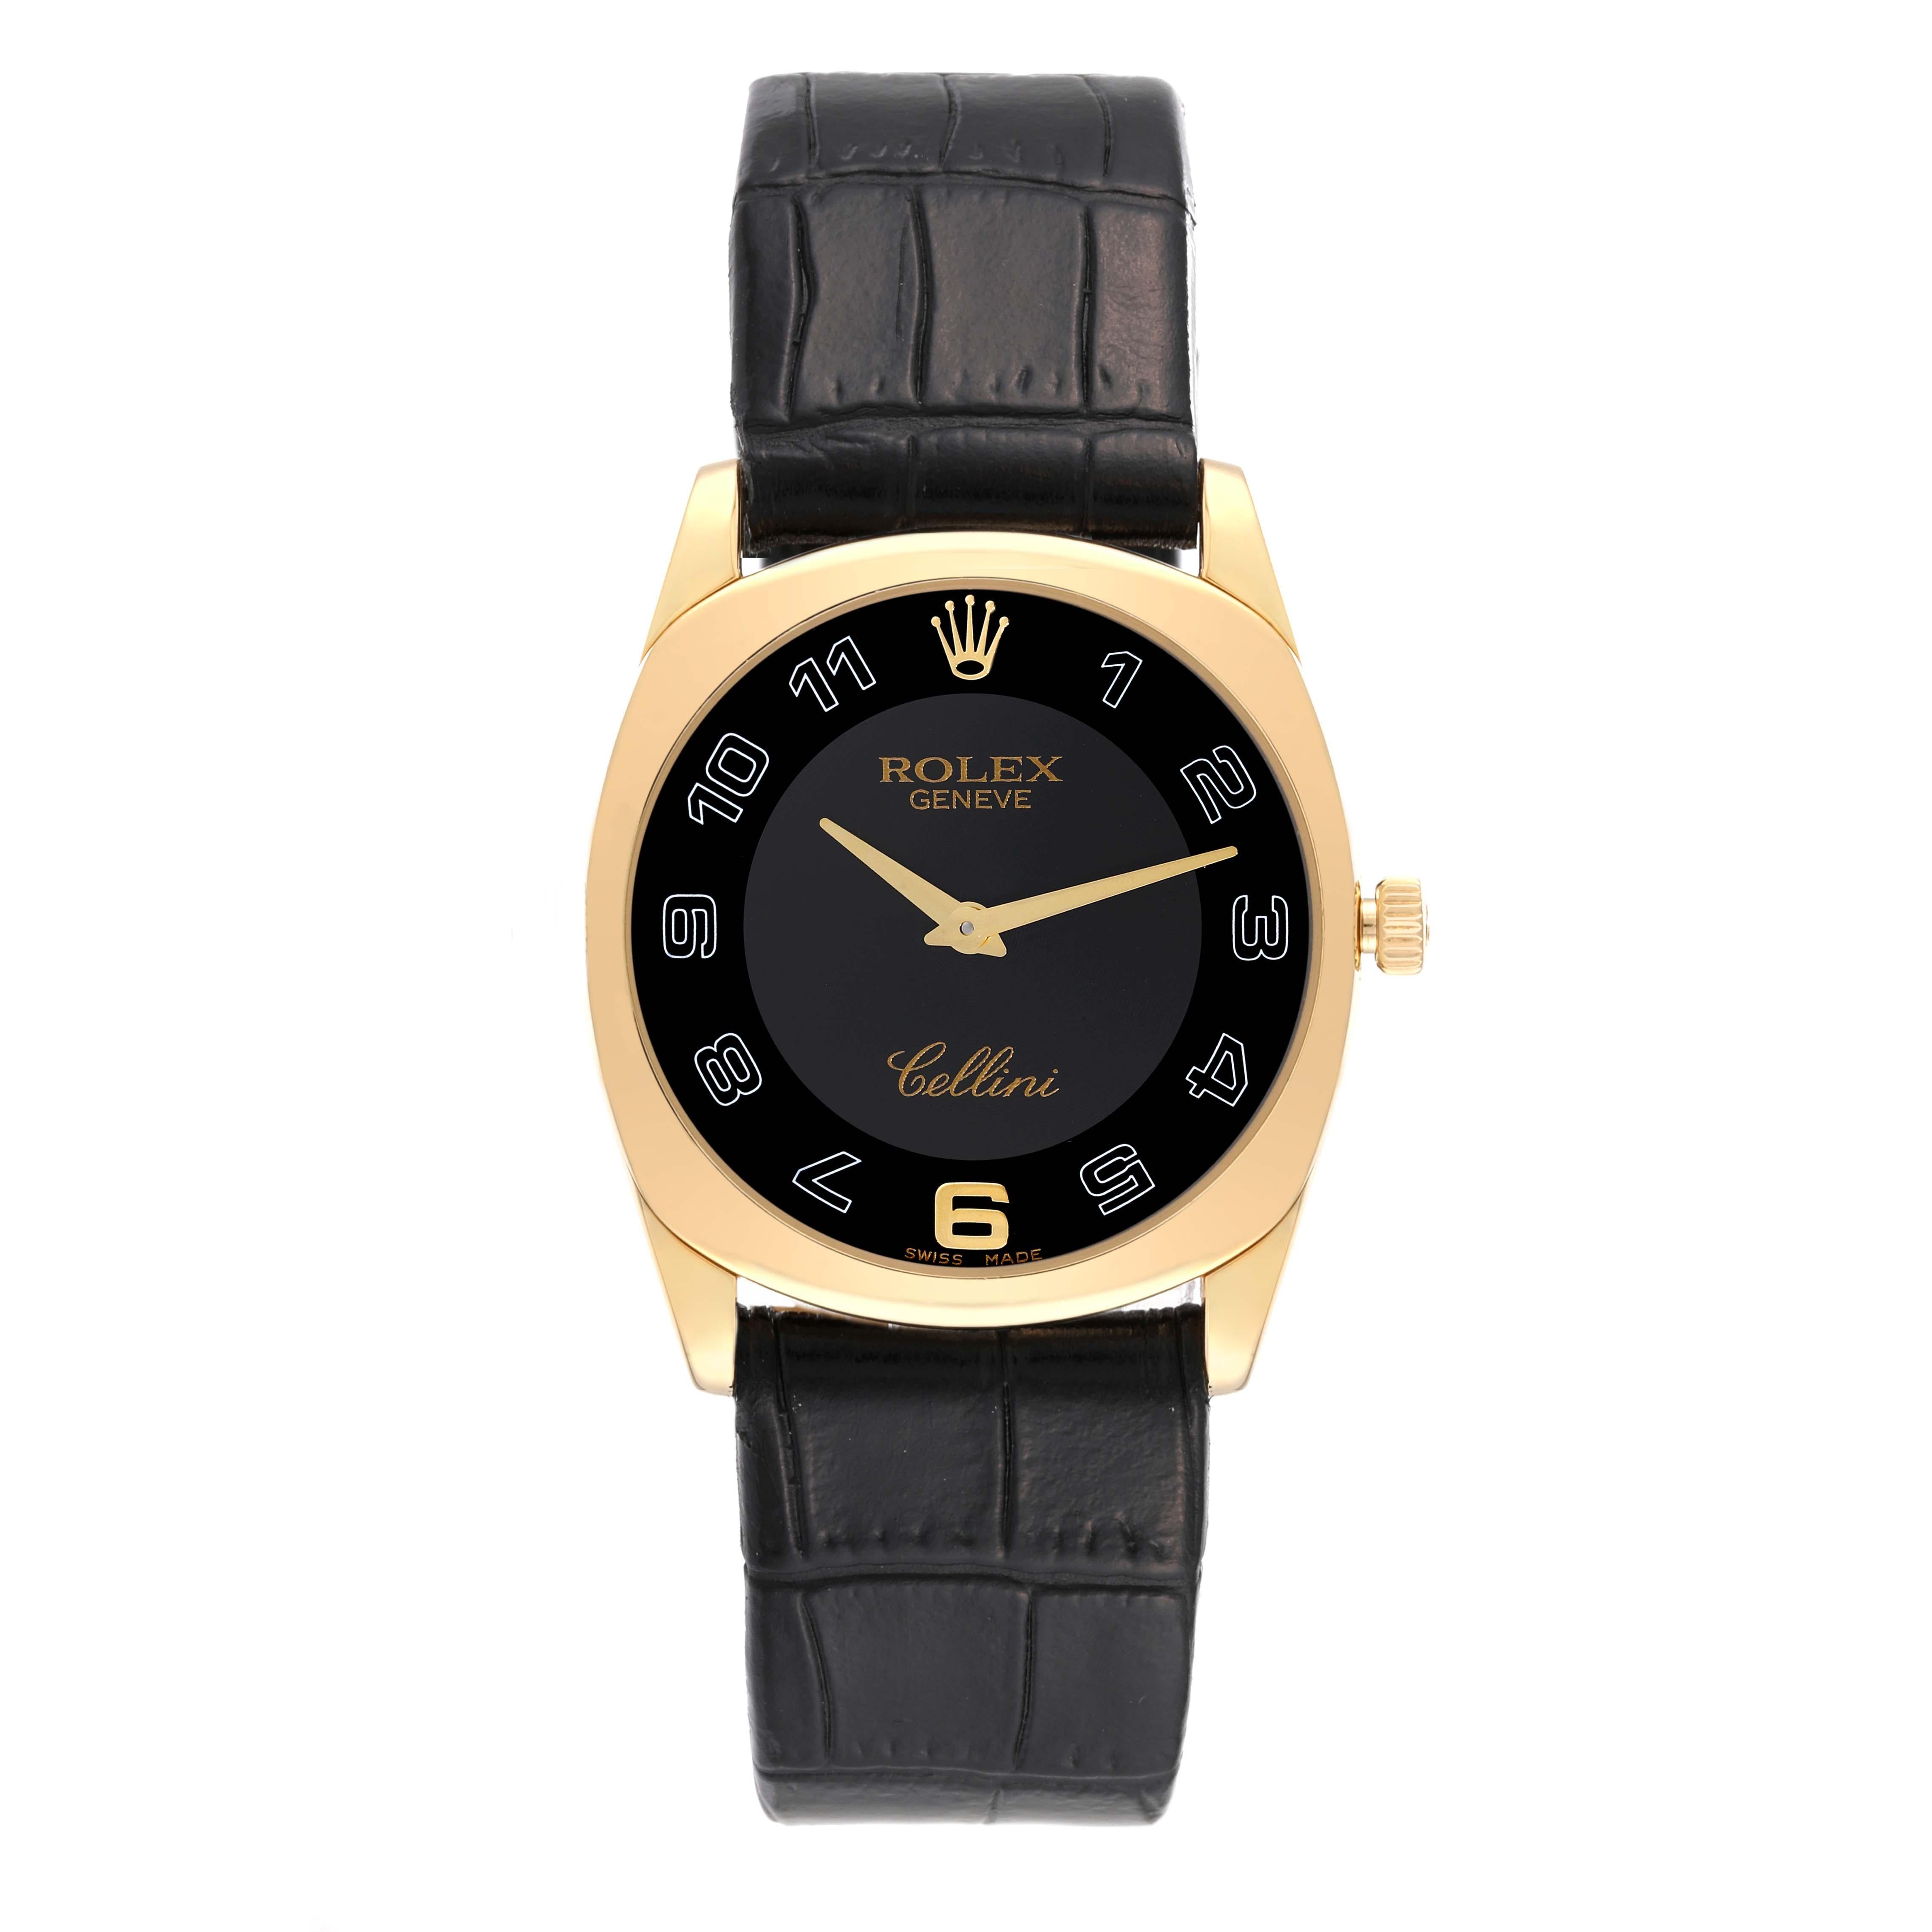 Rolex Cellini Danaos Yellow Gold Black Strap Mens Watch 4233 Card. Manual winding movement. 18k yellow gold cushion shaped case 34.0 mm. Rolex logo on a crown. . Scratch resistant sapphire crystal. Black dial with oversized Arabic numerals. Raised